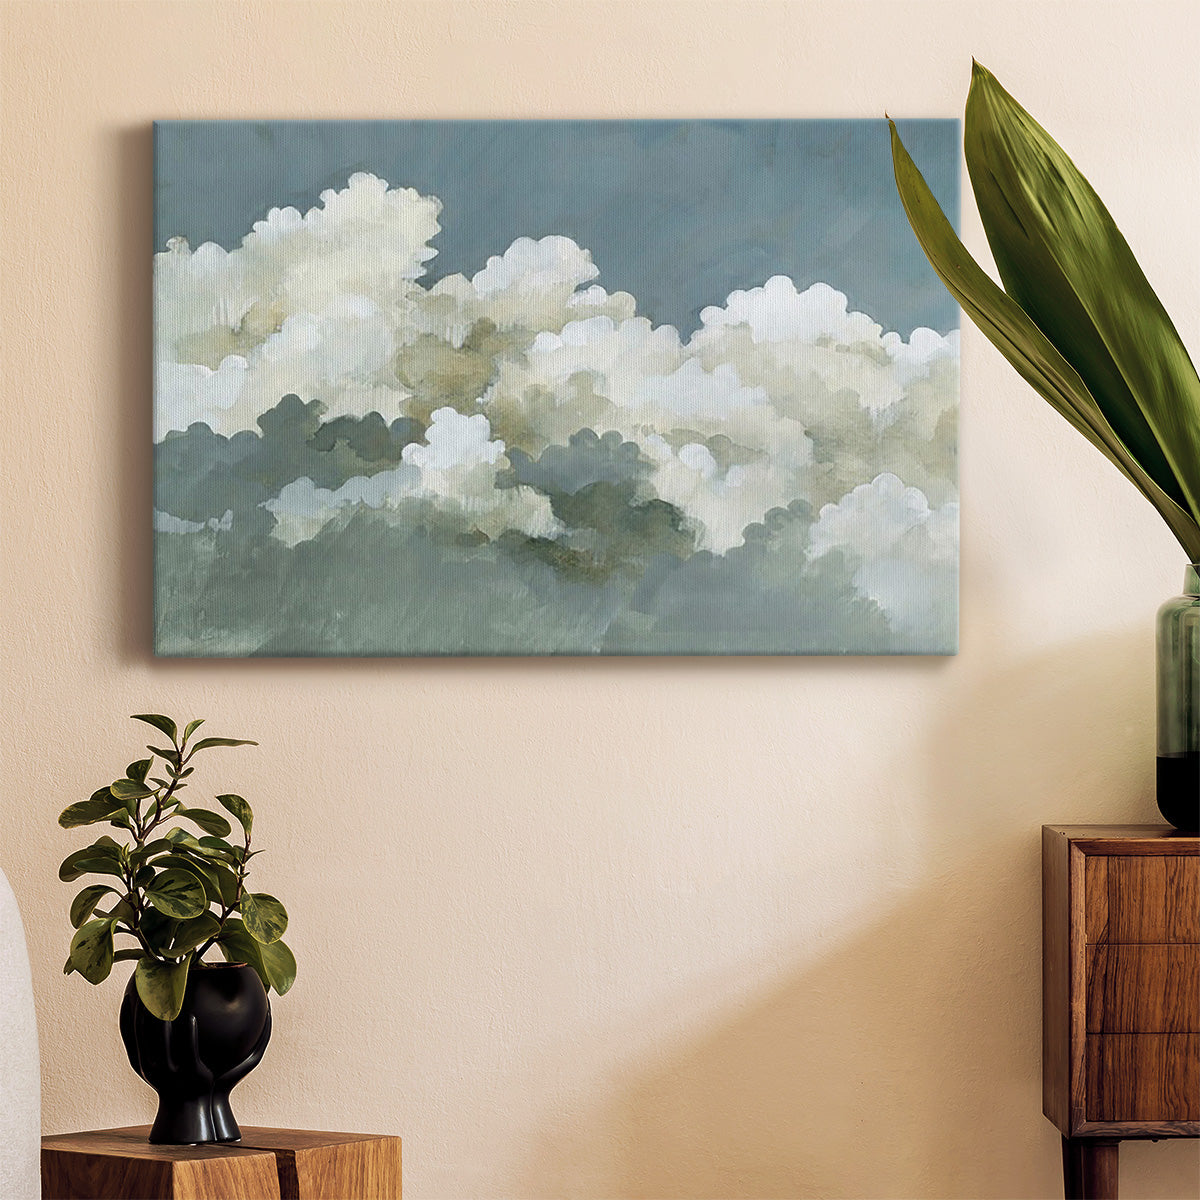 Big Clouds III Premium Gallery Wrapped Canvas - Ready to Hang